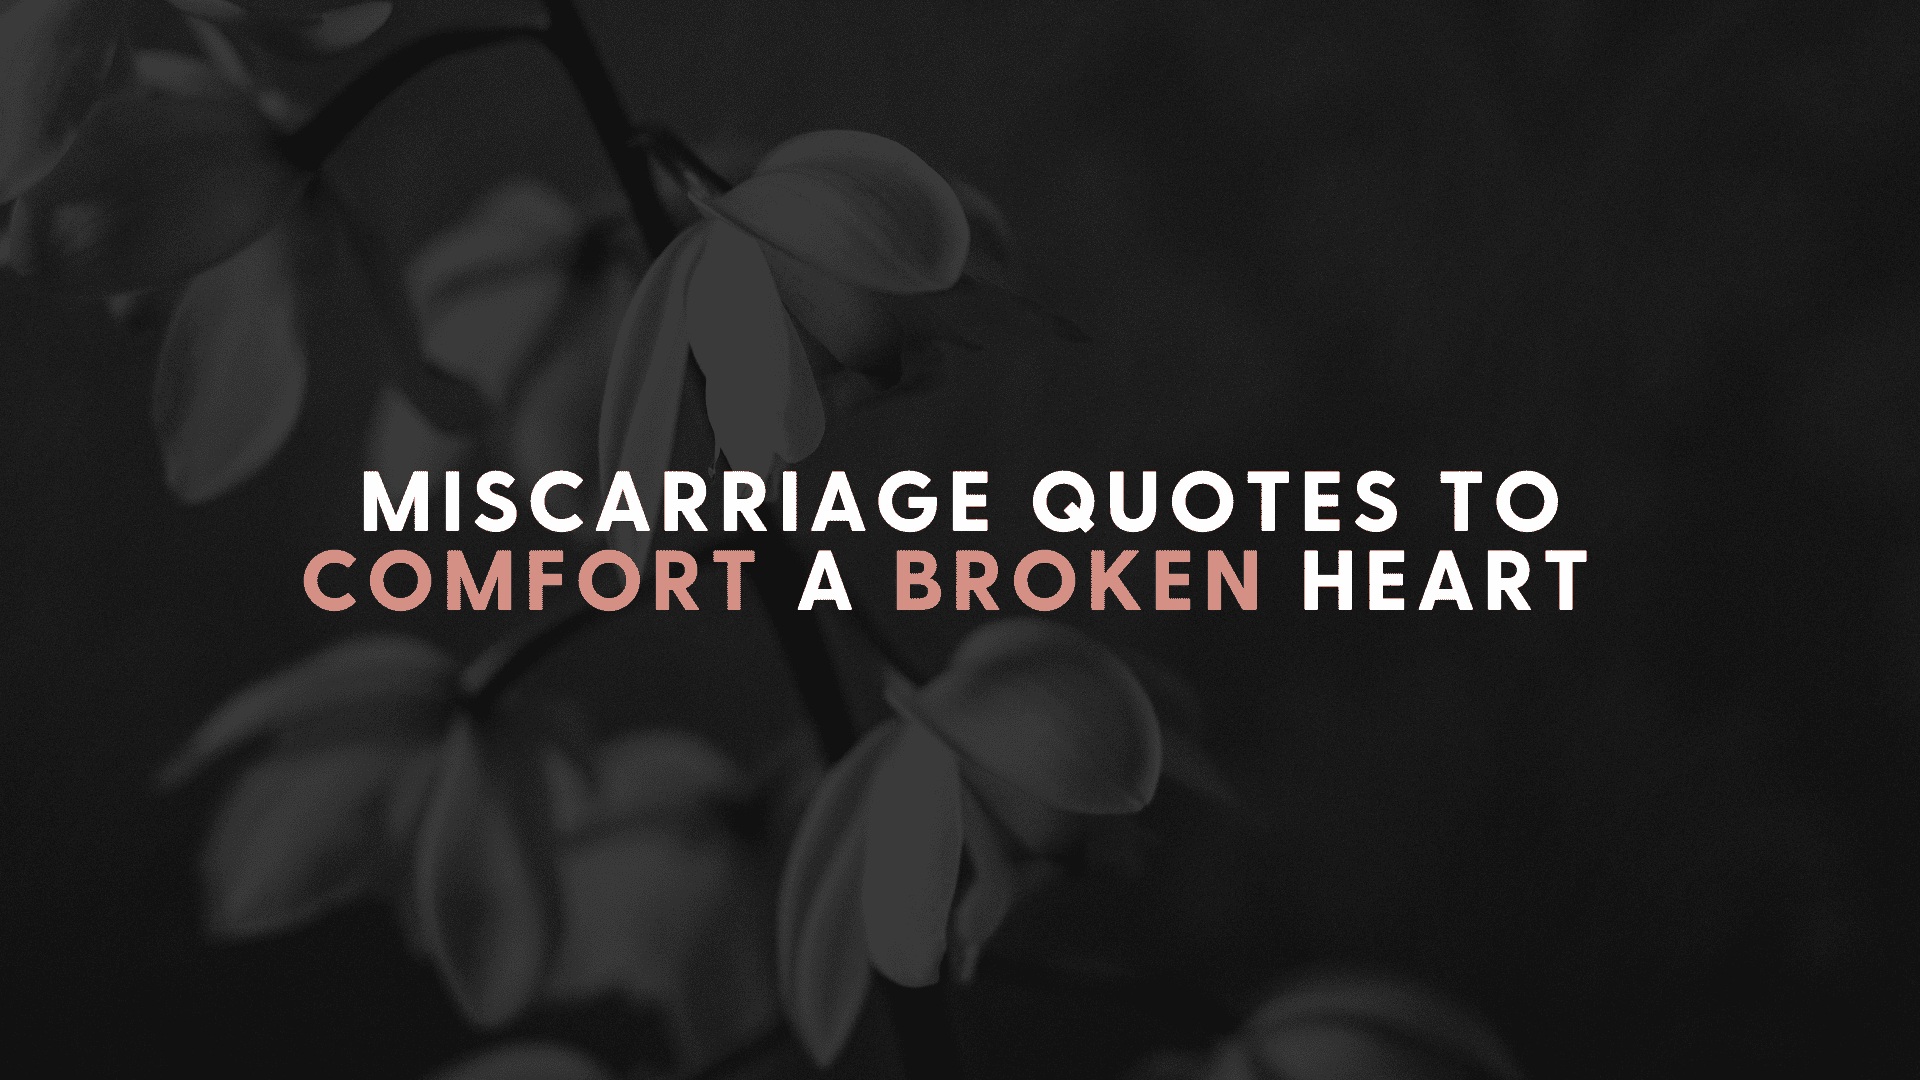 Miscarriage quotes hero image with flowers